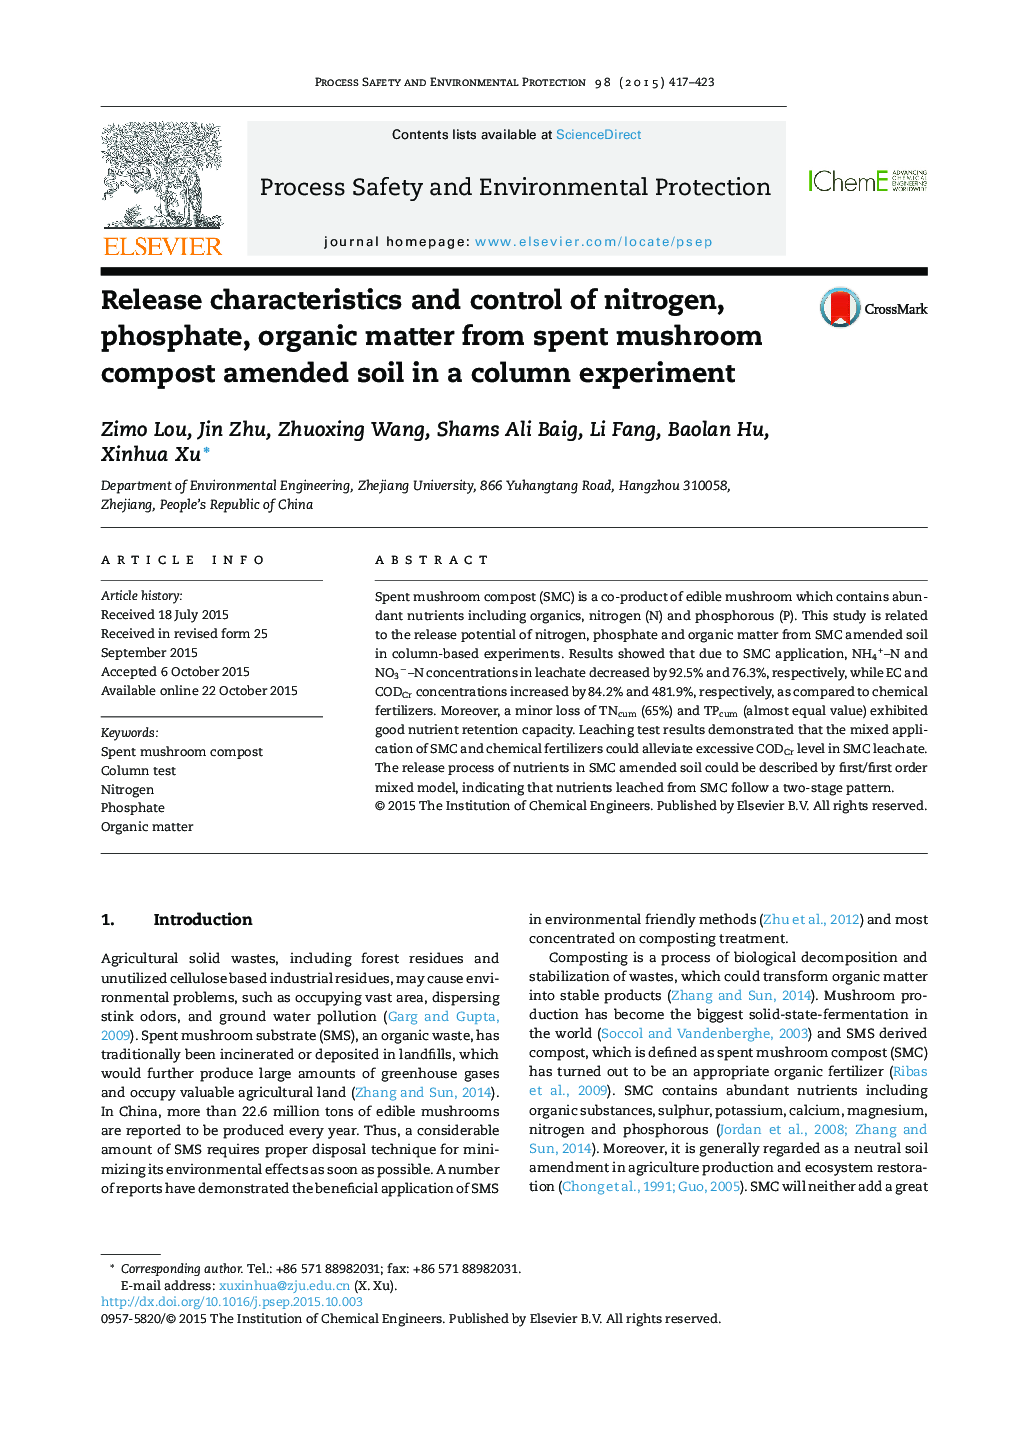 Release characteristics and control of nitrogen, phosphate, organic matter from spent mushroom compost amended soil in a column experiment